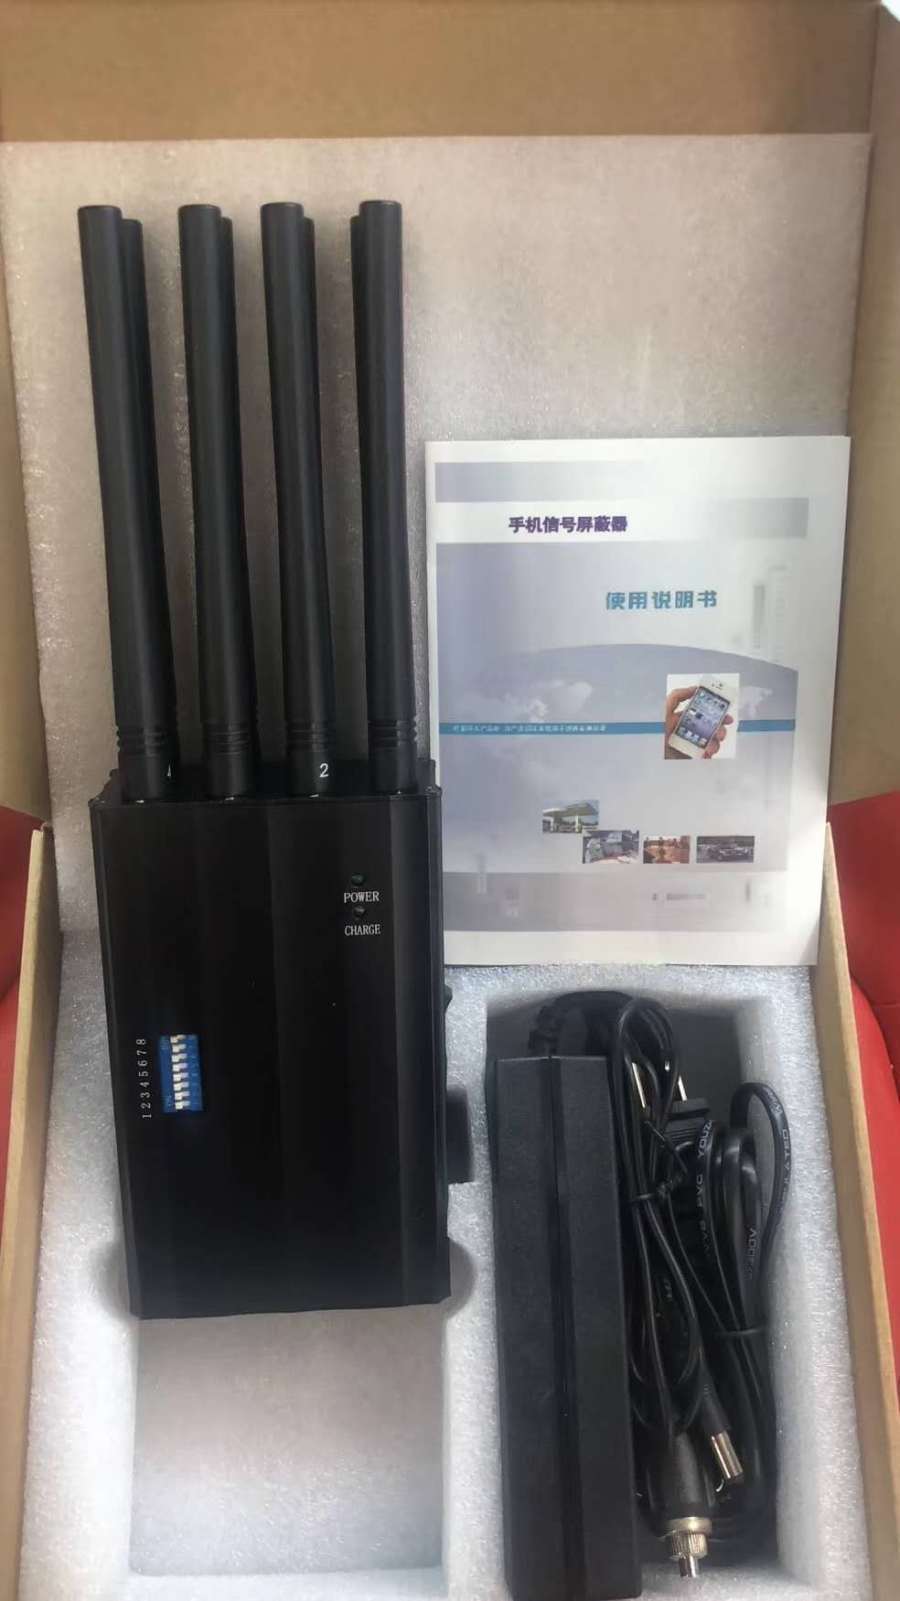 Adjustable 8band handheld WIFI GPS Cellphone signal jammer, great quality, do you want it?